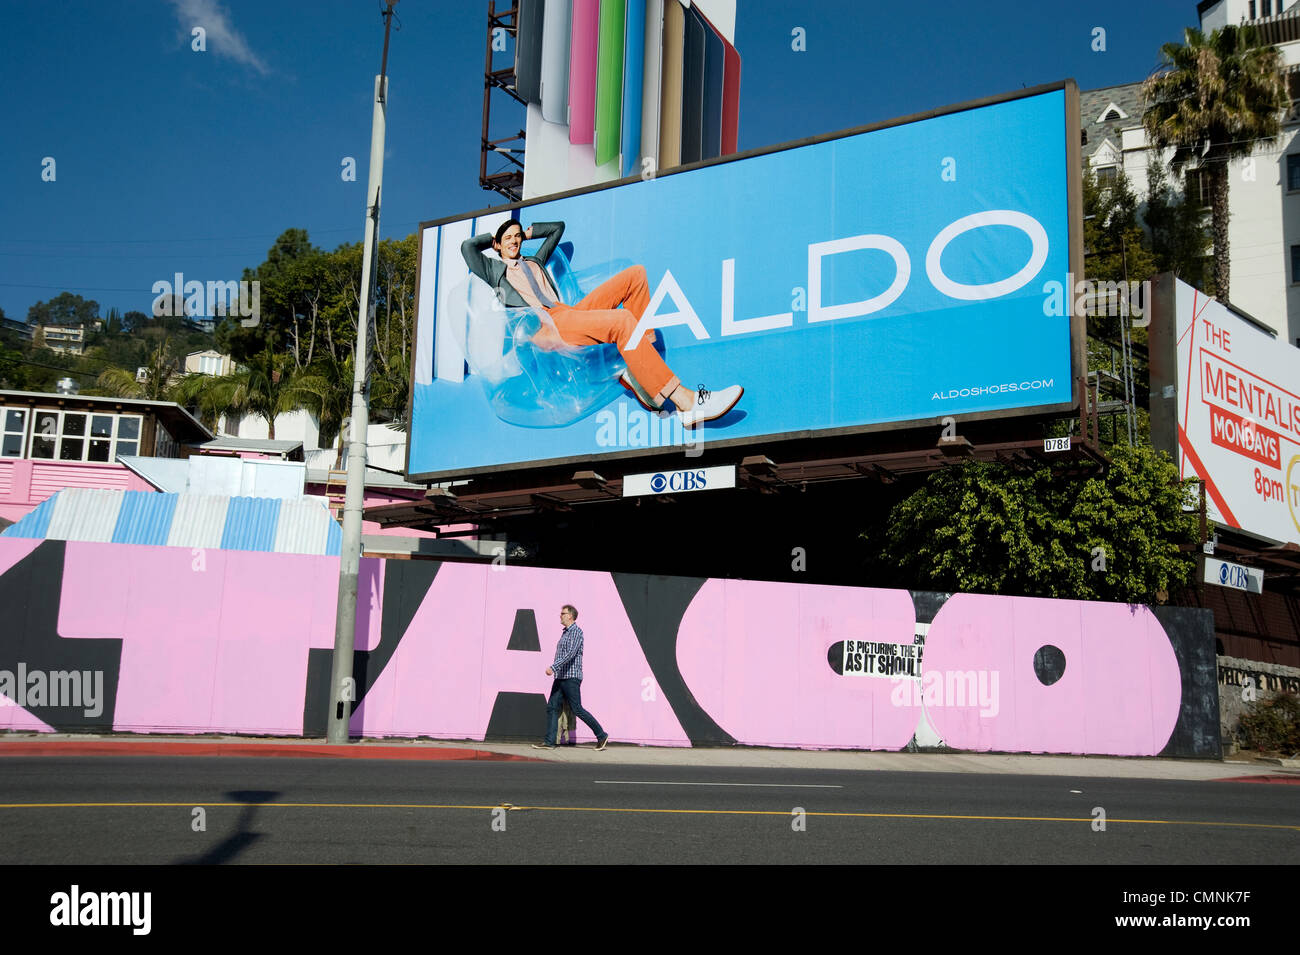 Sunset Strip in West Hollywood with pedestrian and billboard for Aldo Shoes Stock Photo